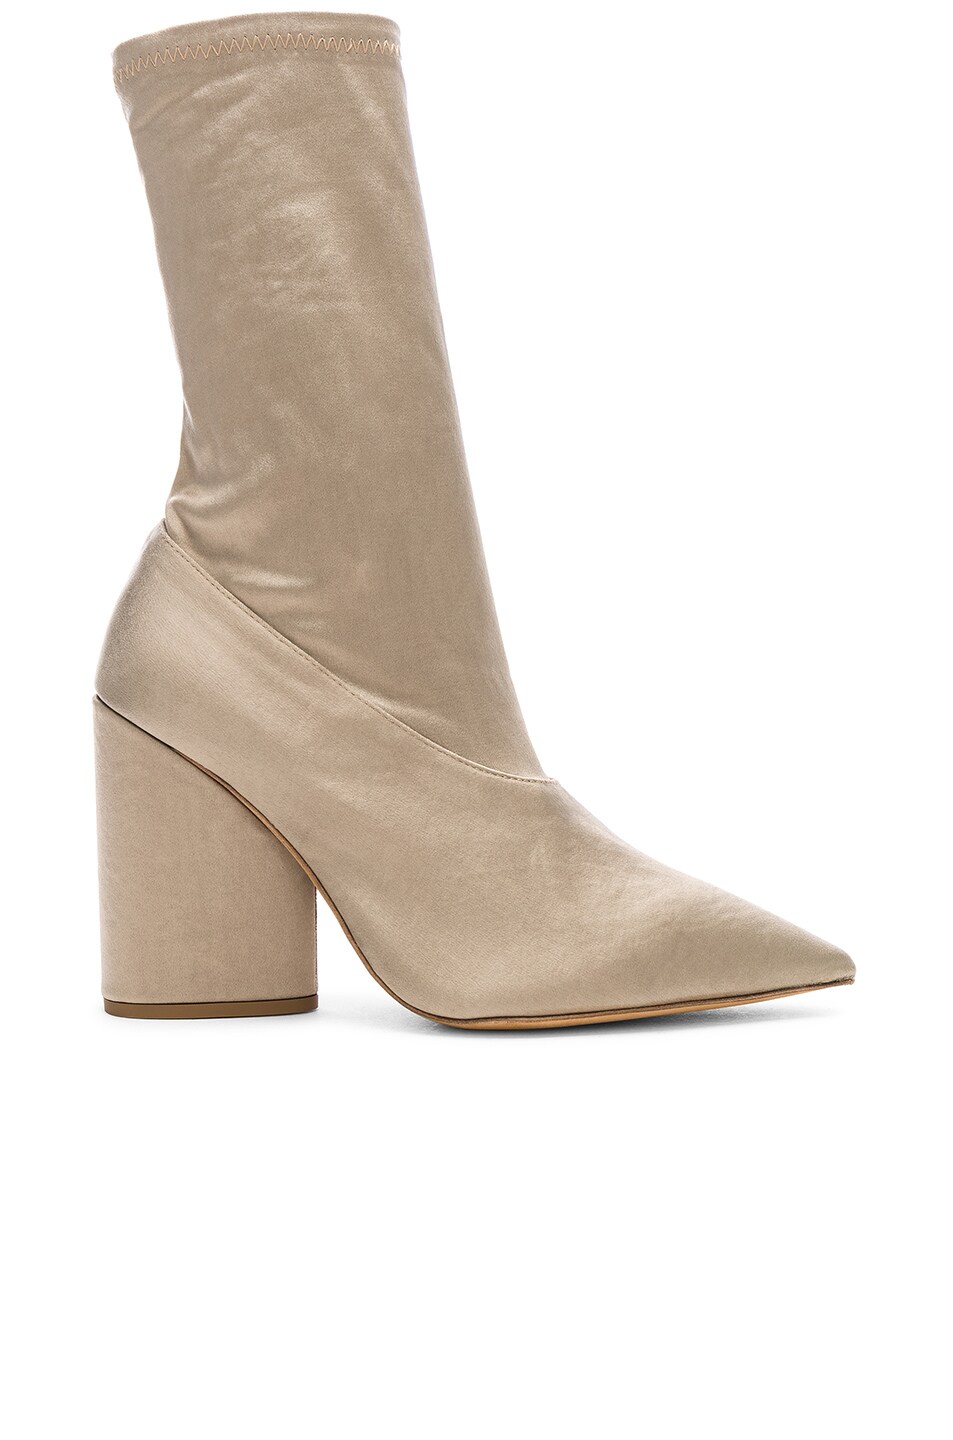 Image 1 of YEEZY Season 7 Stretch Satin Ankle Bootie in Military Light